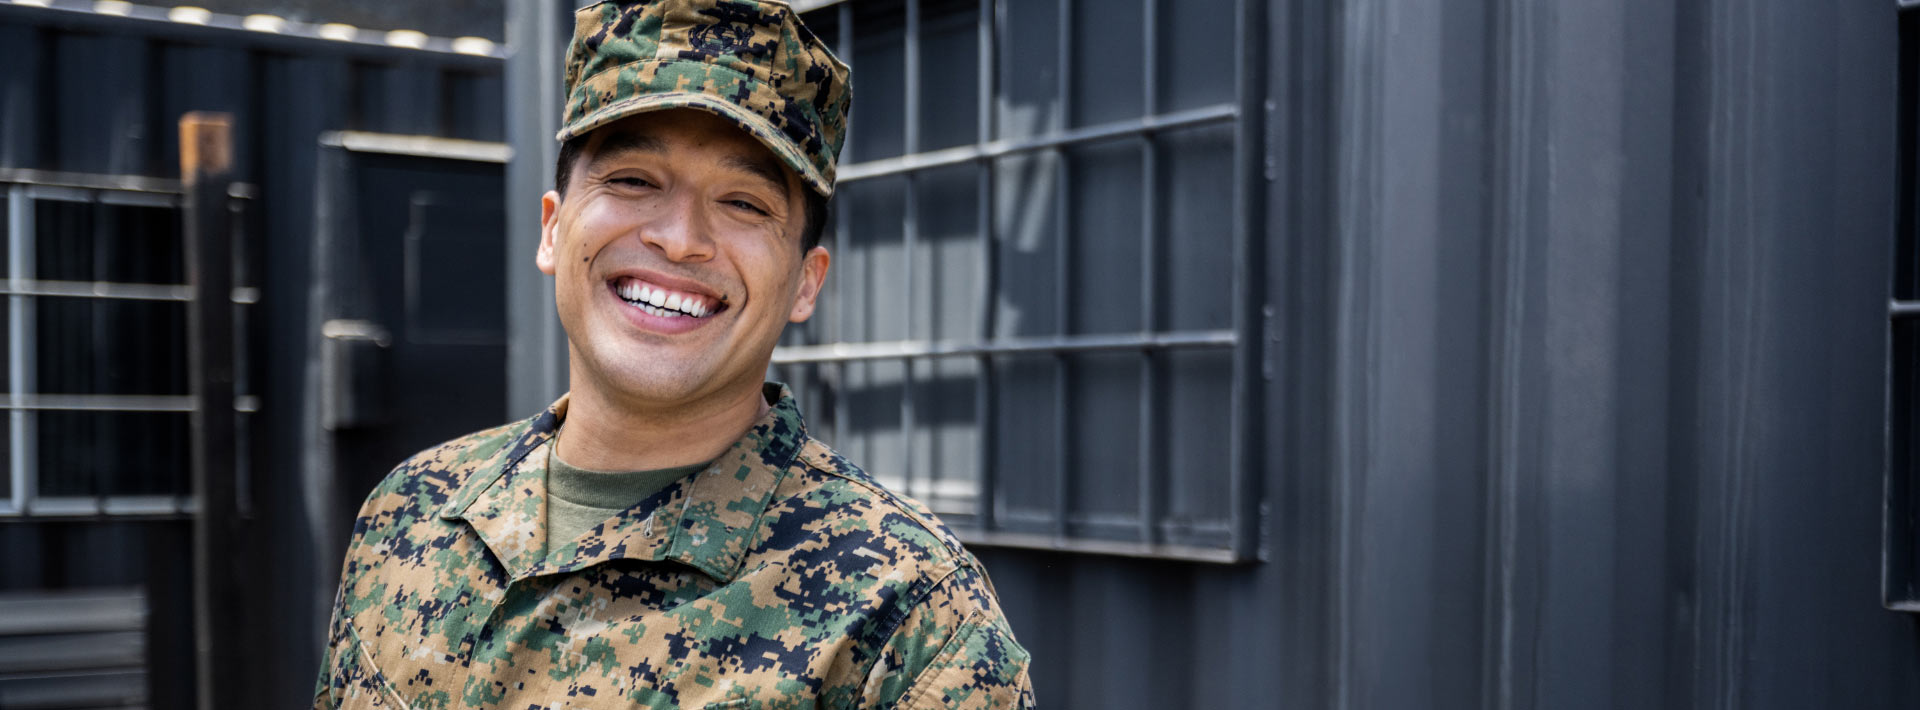 A man in a military uniform smiles widely